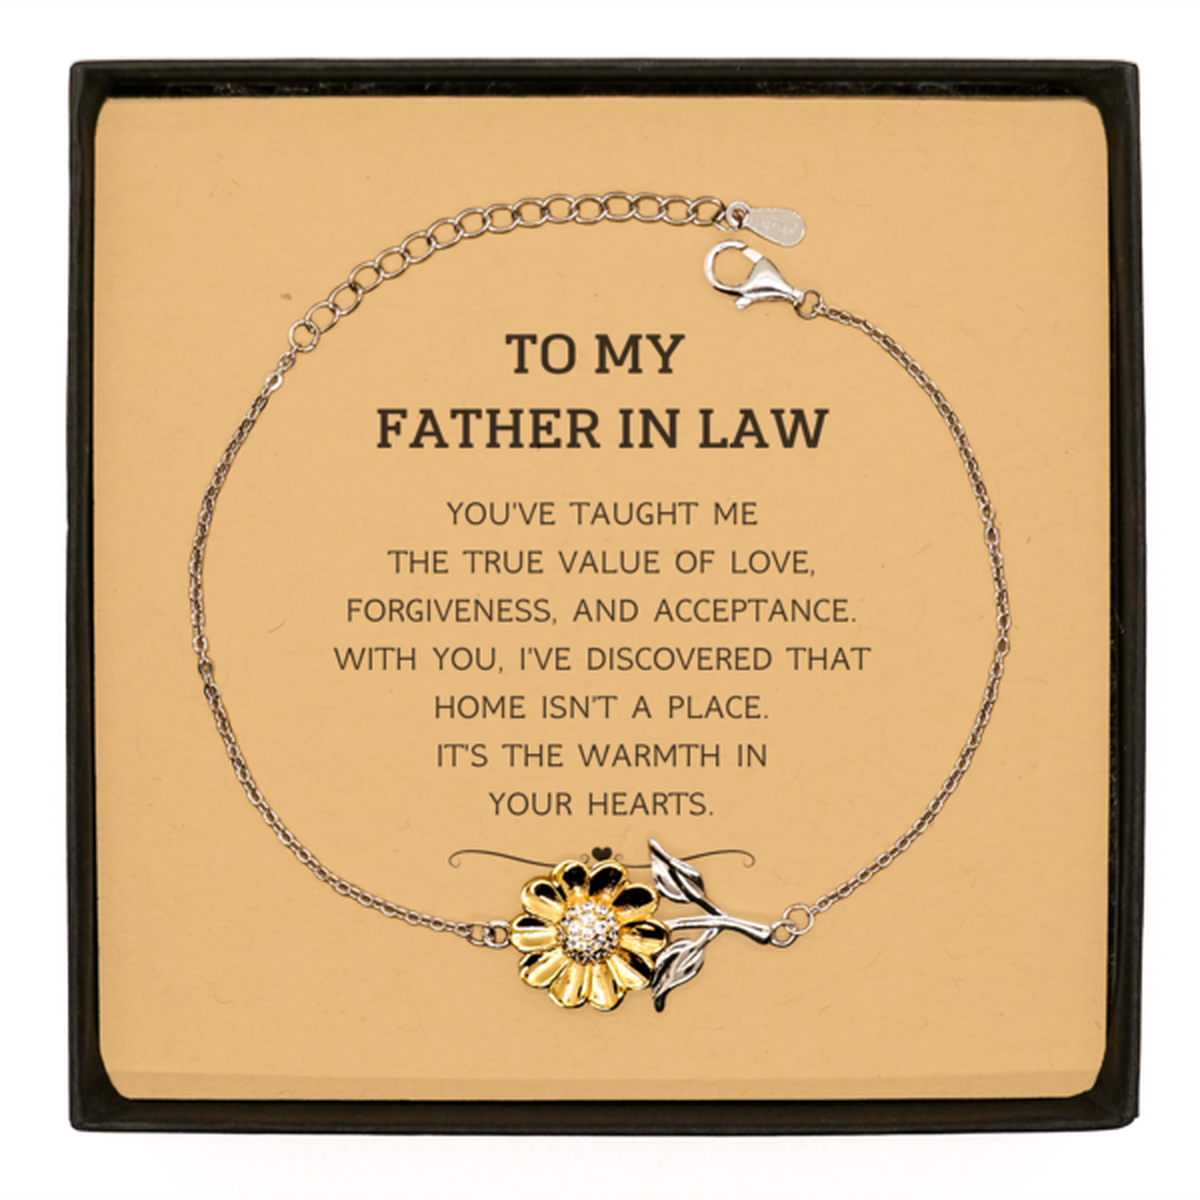 To My Father In Law Gifts, You've taught me the true value of love, Thank You Gifts For Father In Law, Birthday Sunflower Bracelet For Father In Law